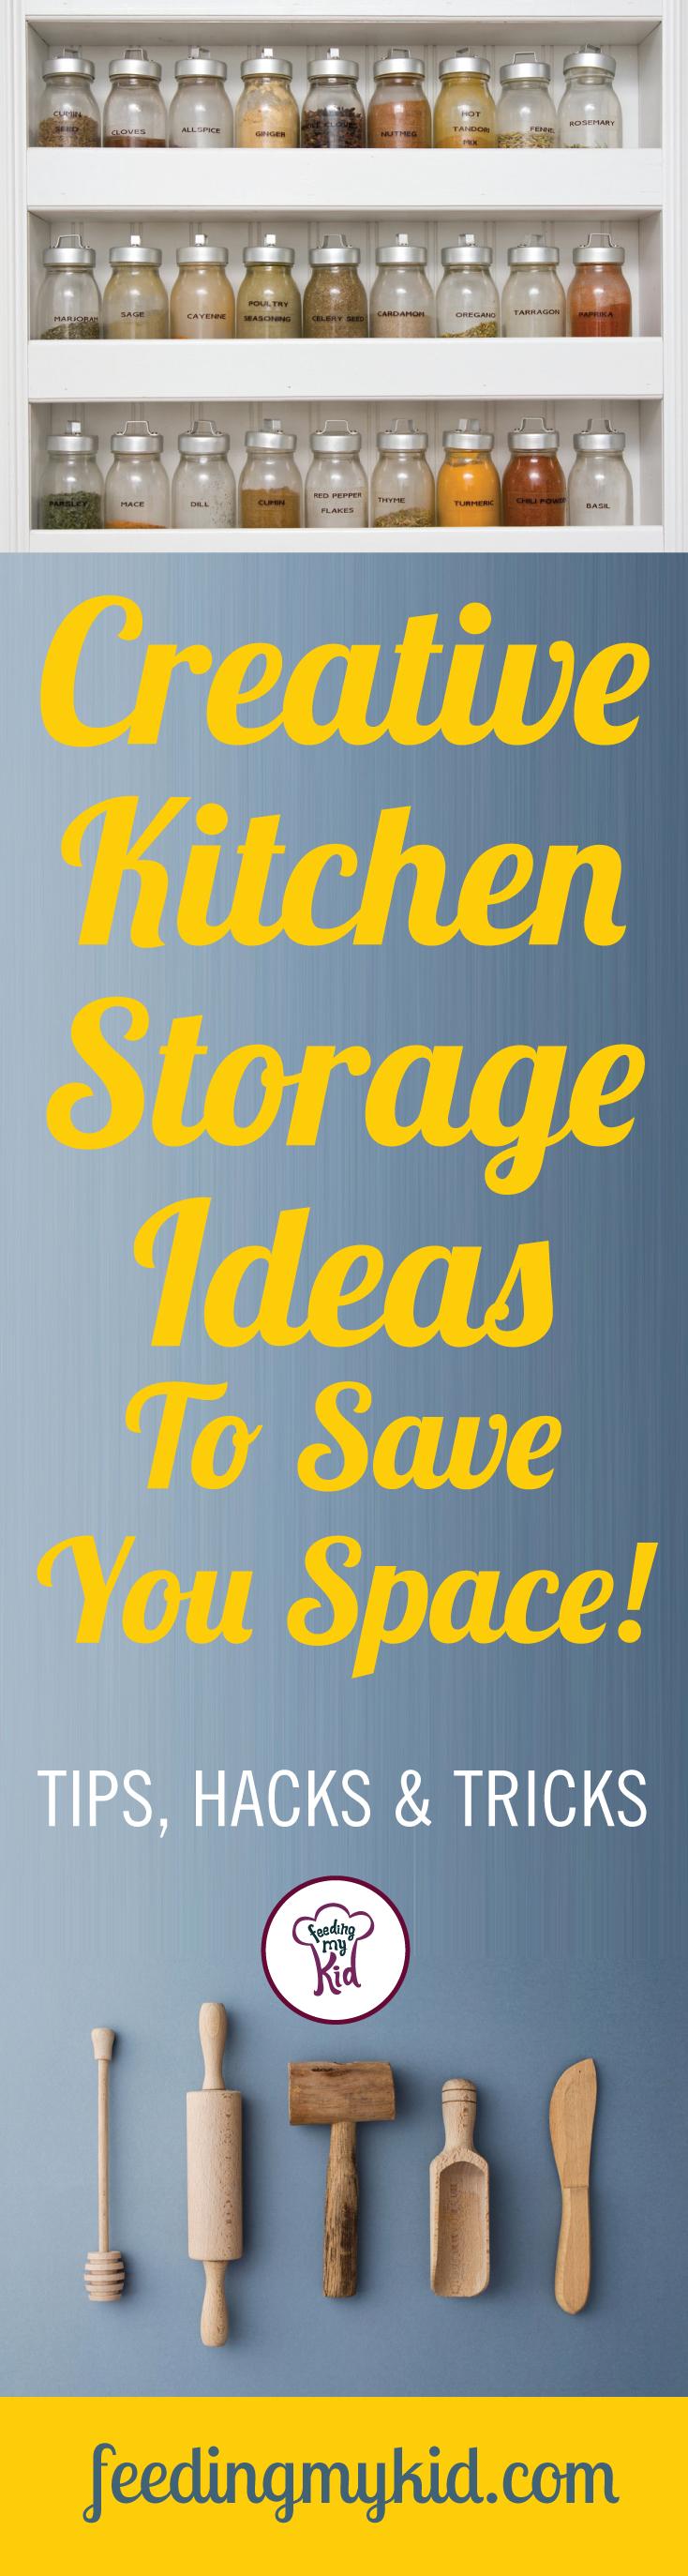 Creative Kitchen Storage Ideas that Will Save You Space! Tips, Hacks & Tricks.